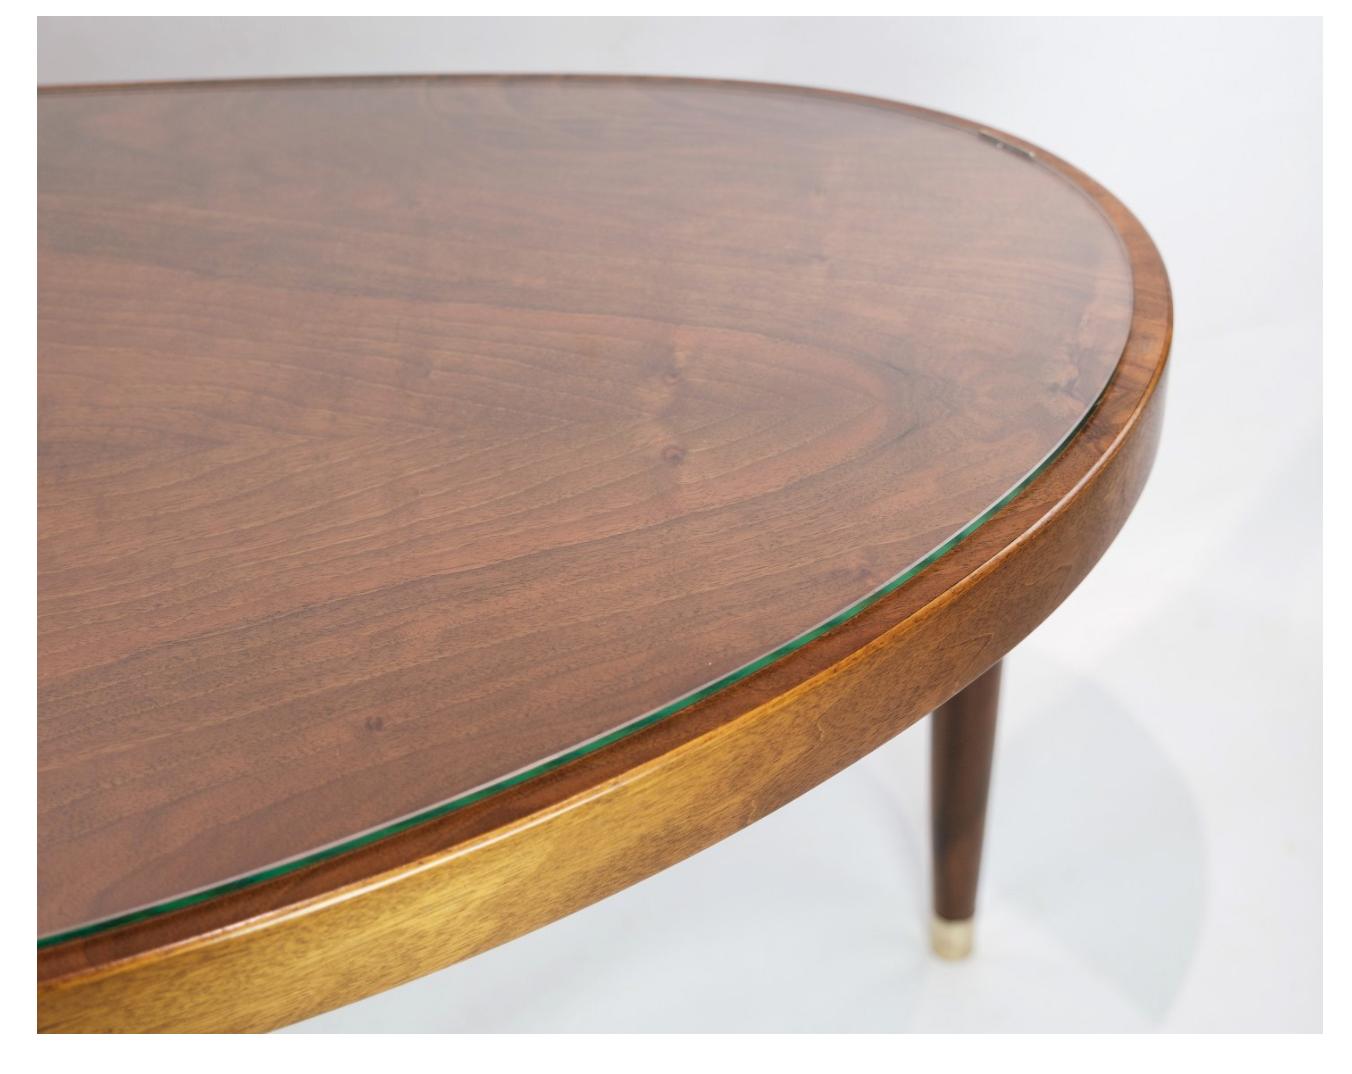 Mid-Century Modern Coffee Table with Glass Top by Danish Master Carpenter in Walnut around 1940s For Sale